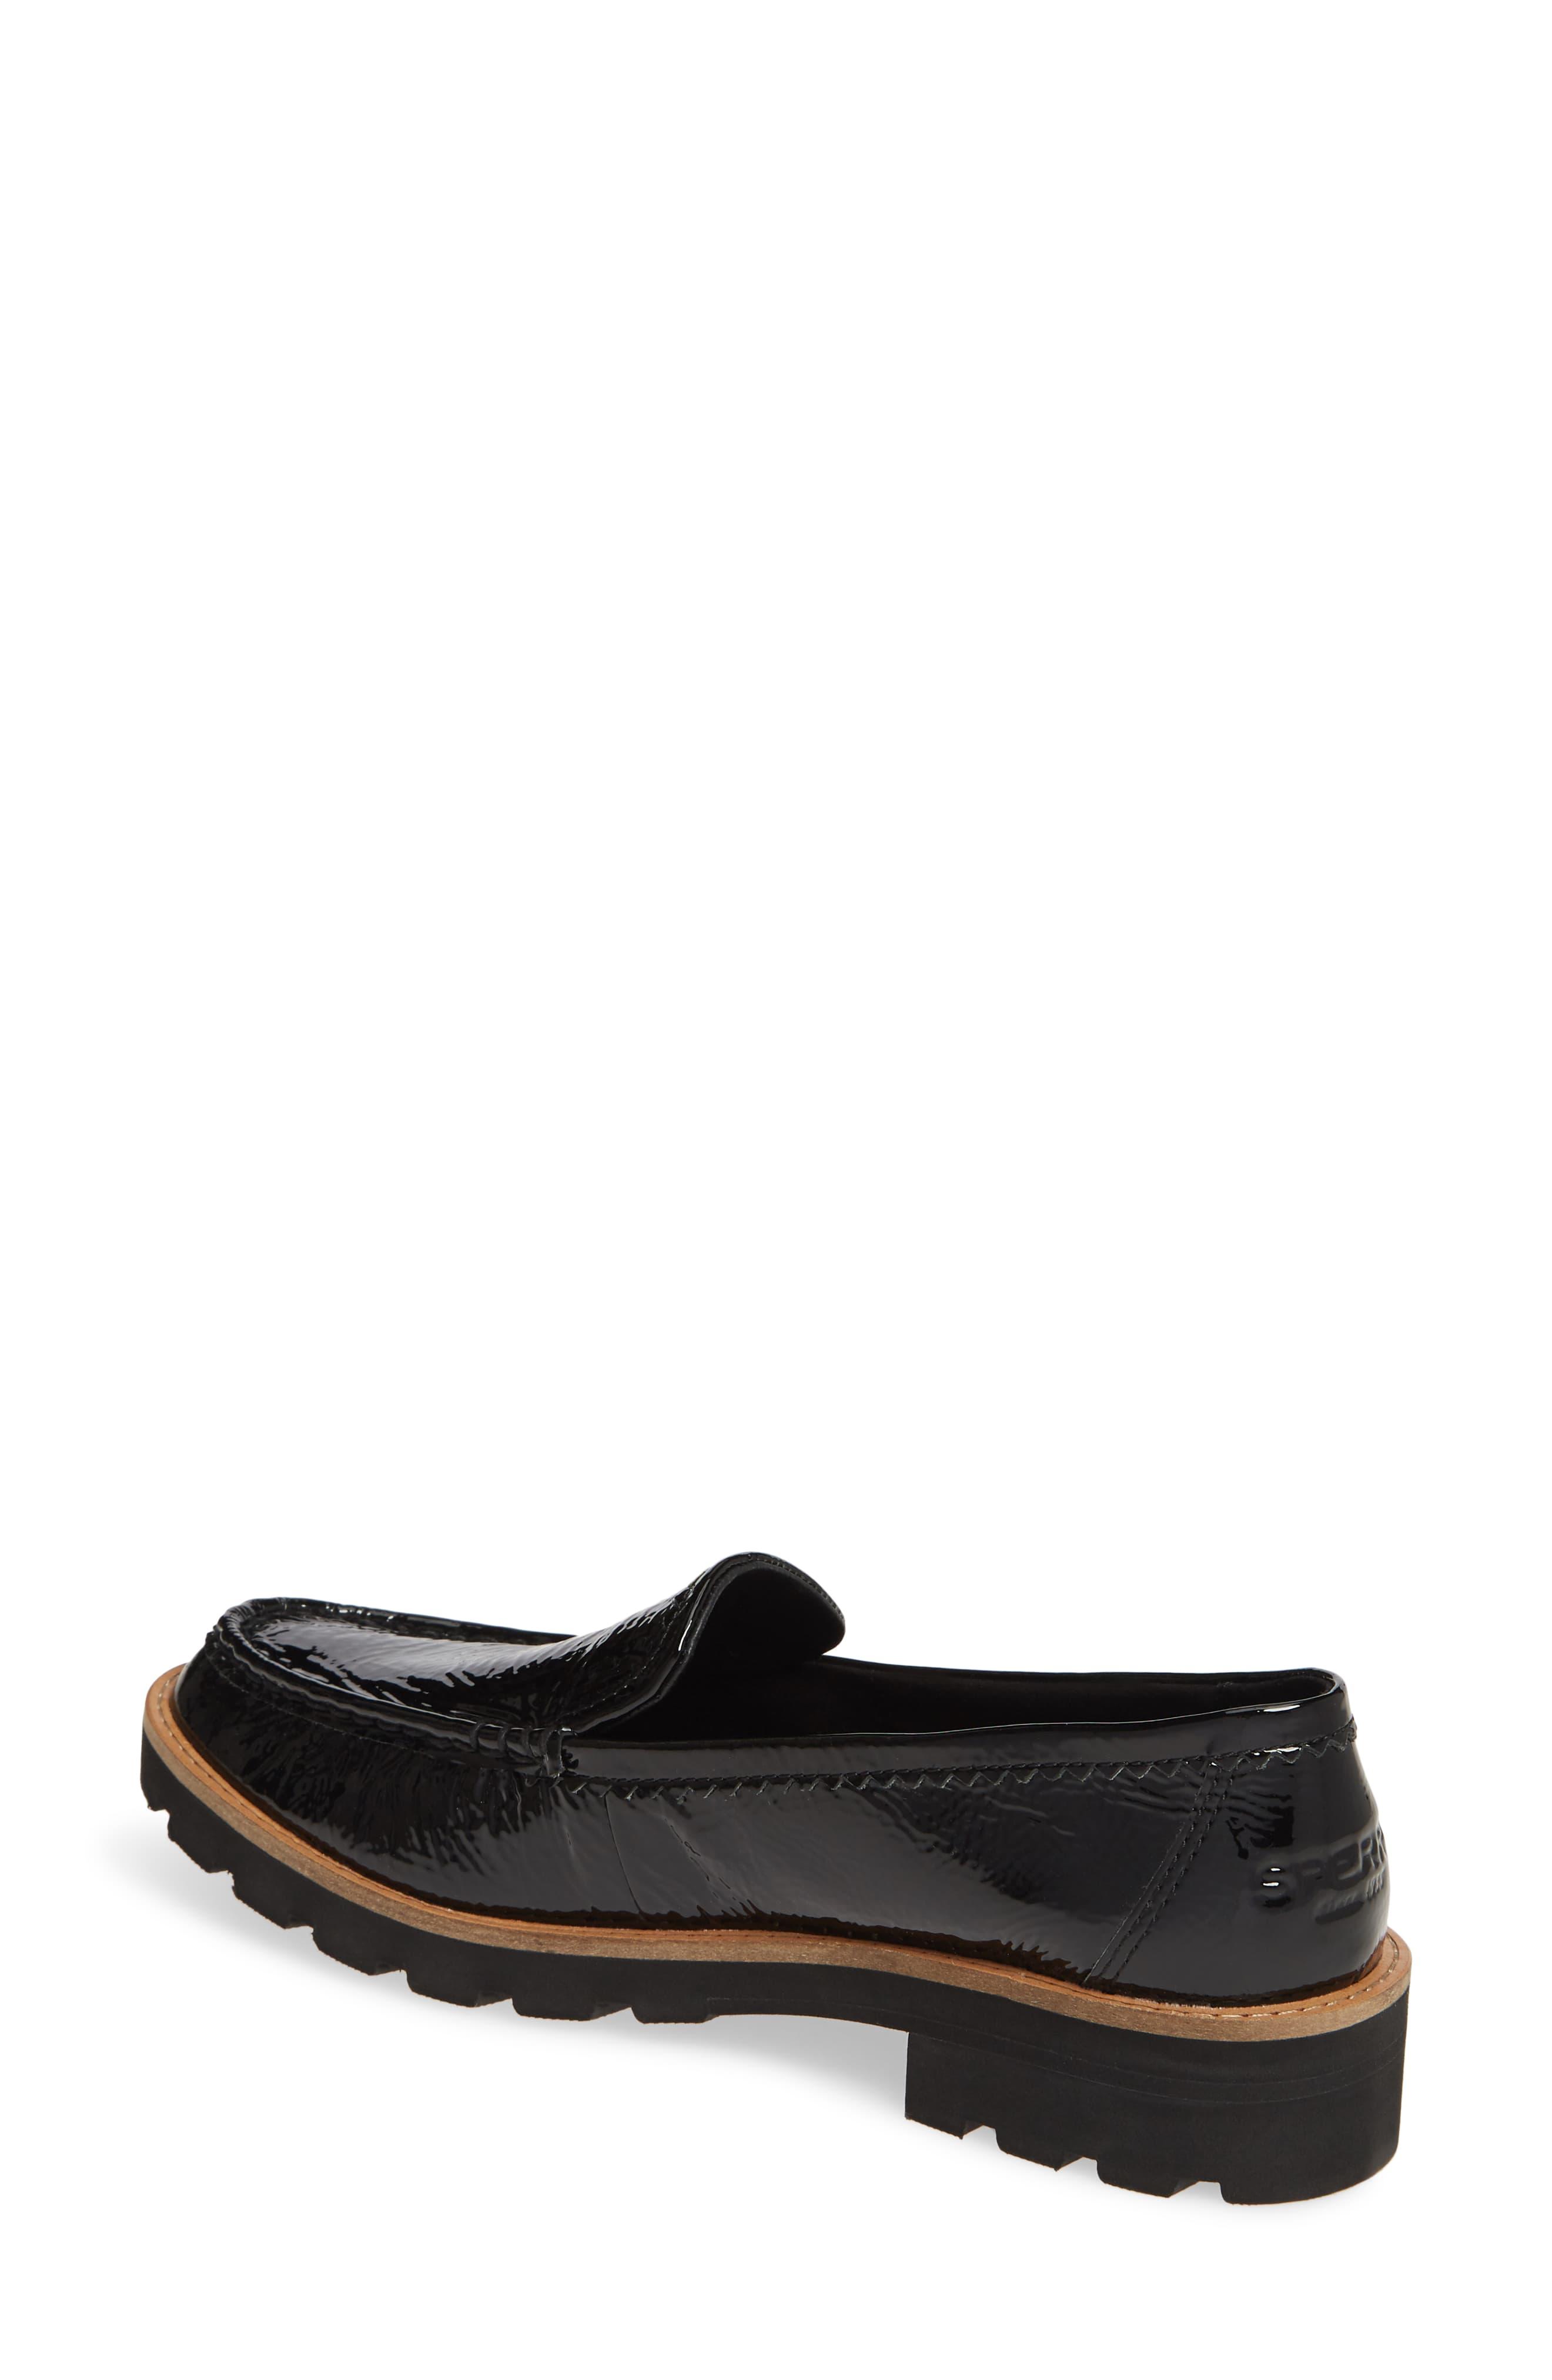 Sperry Top-Sider Authentic Lug Sole Loafer in Black Leather Patent ...